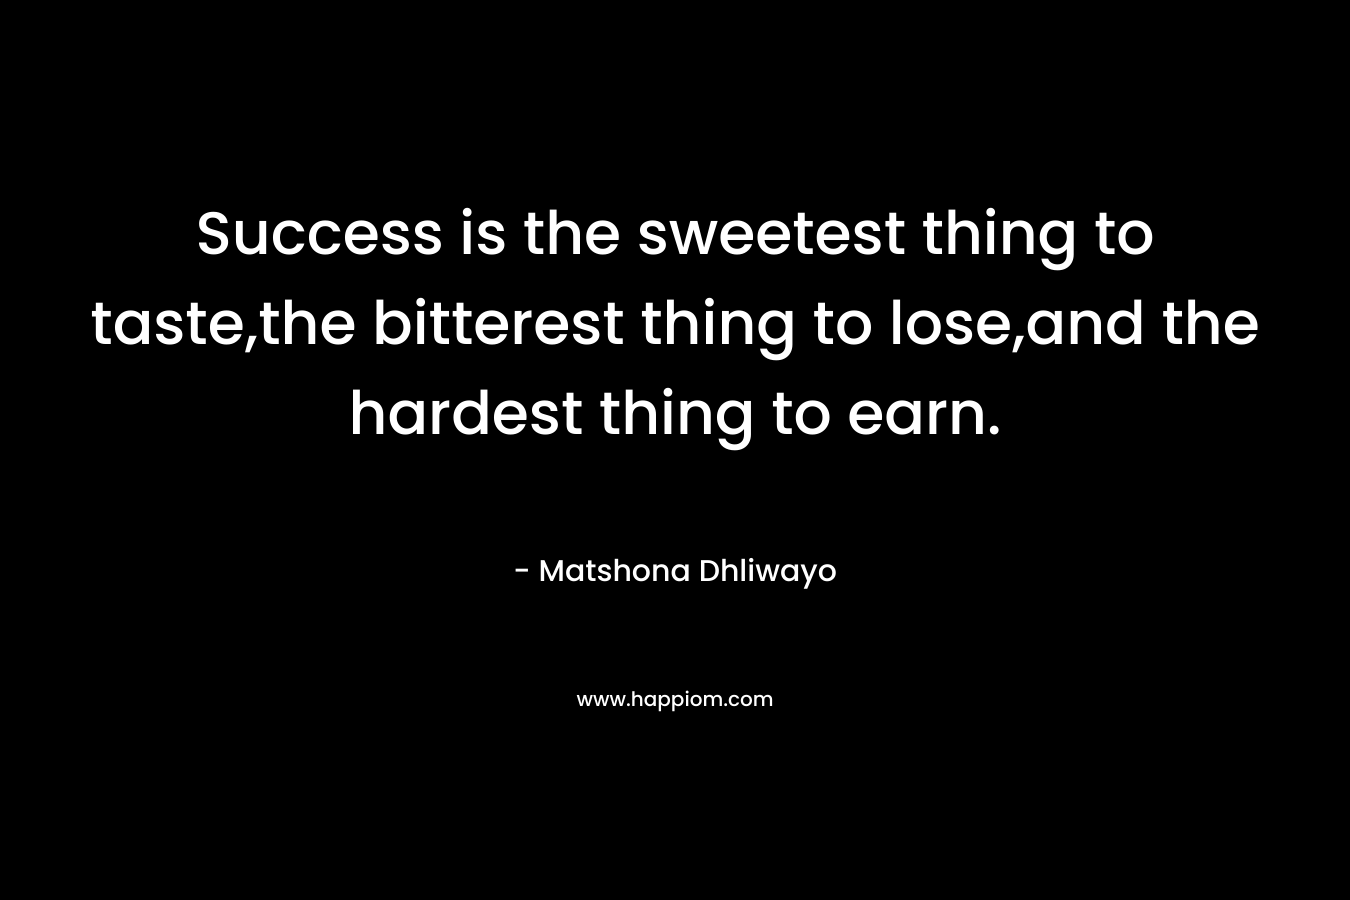 Success is the sweetest thing to taste,the bitterest thing to lose,and the hardest thing to earn.